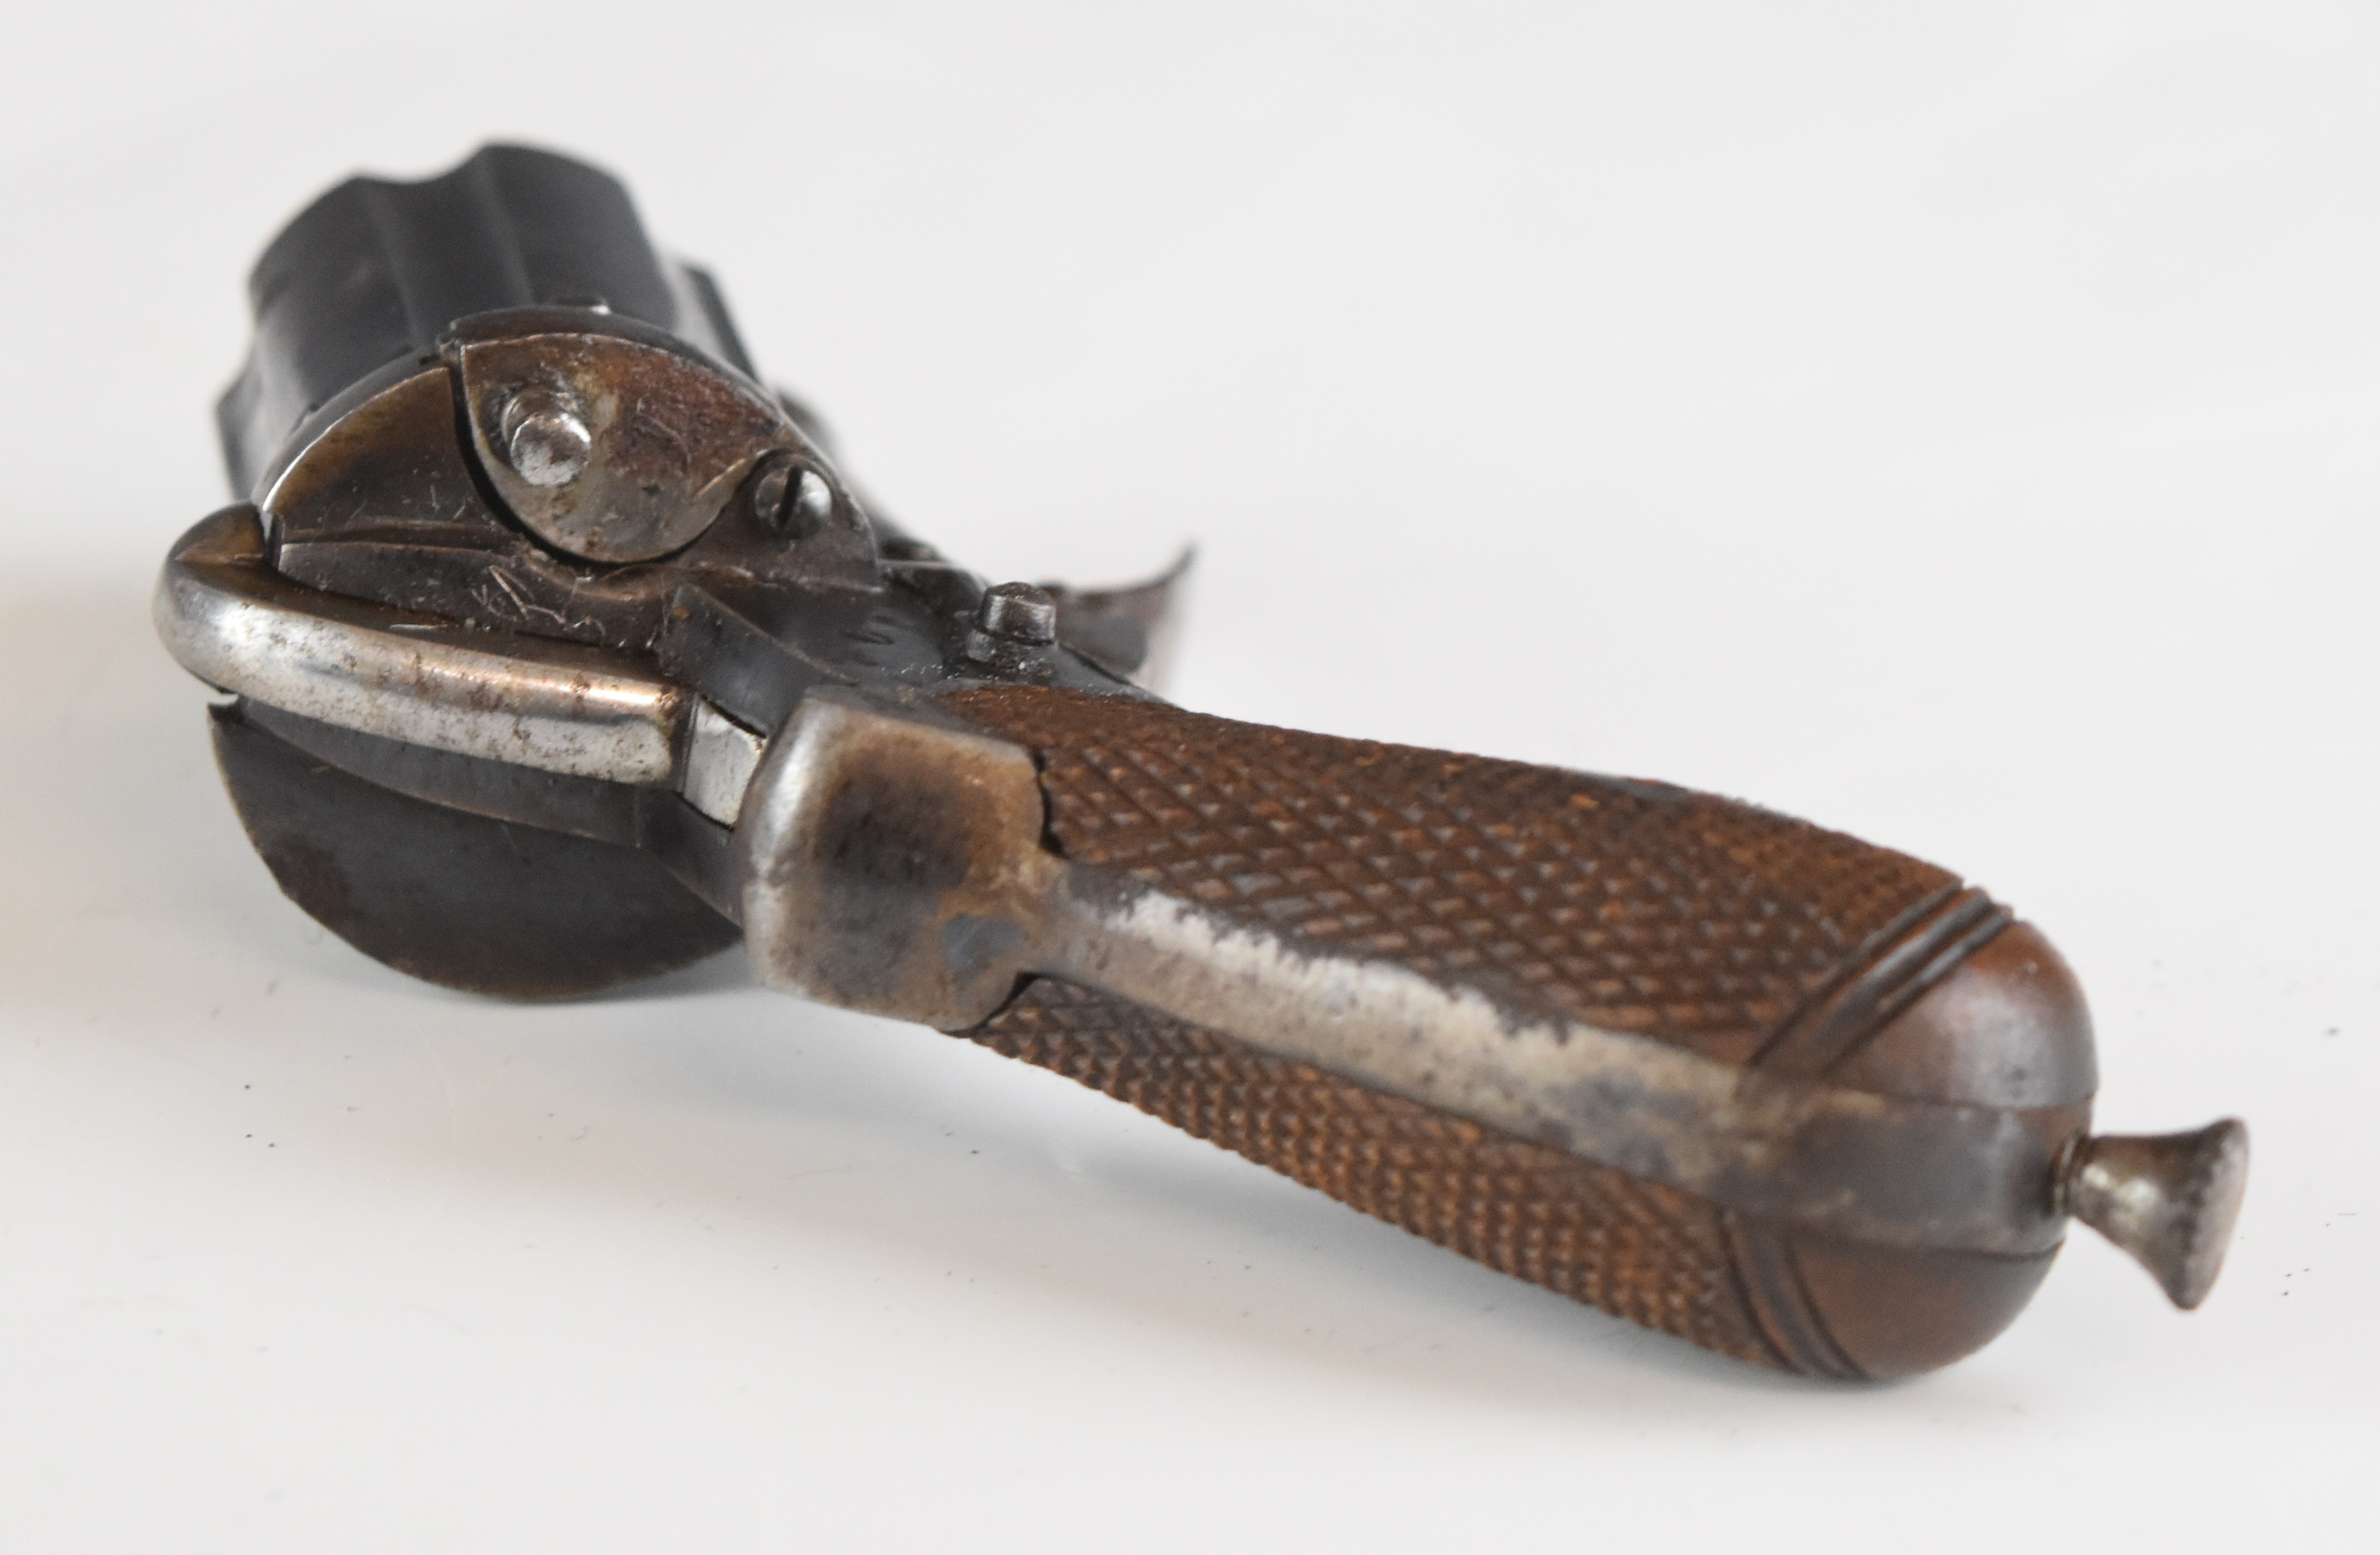 Unnamed 5mm six-shot pinfire hammer action pepperbox pistol/ revolver with chequered wooden grips, - Image 3 of 8